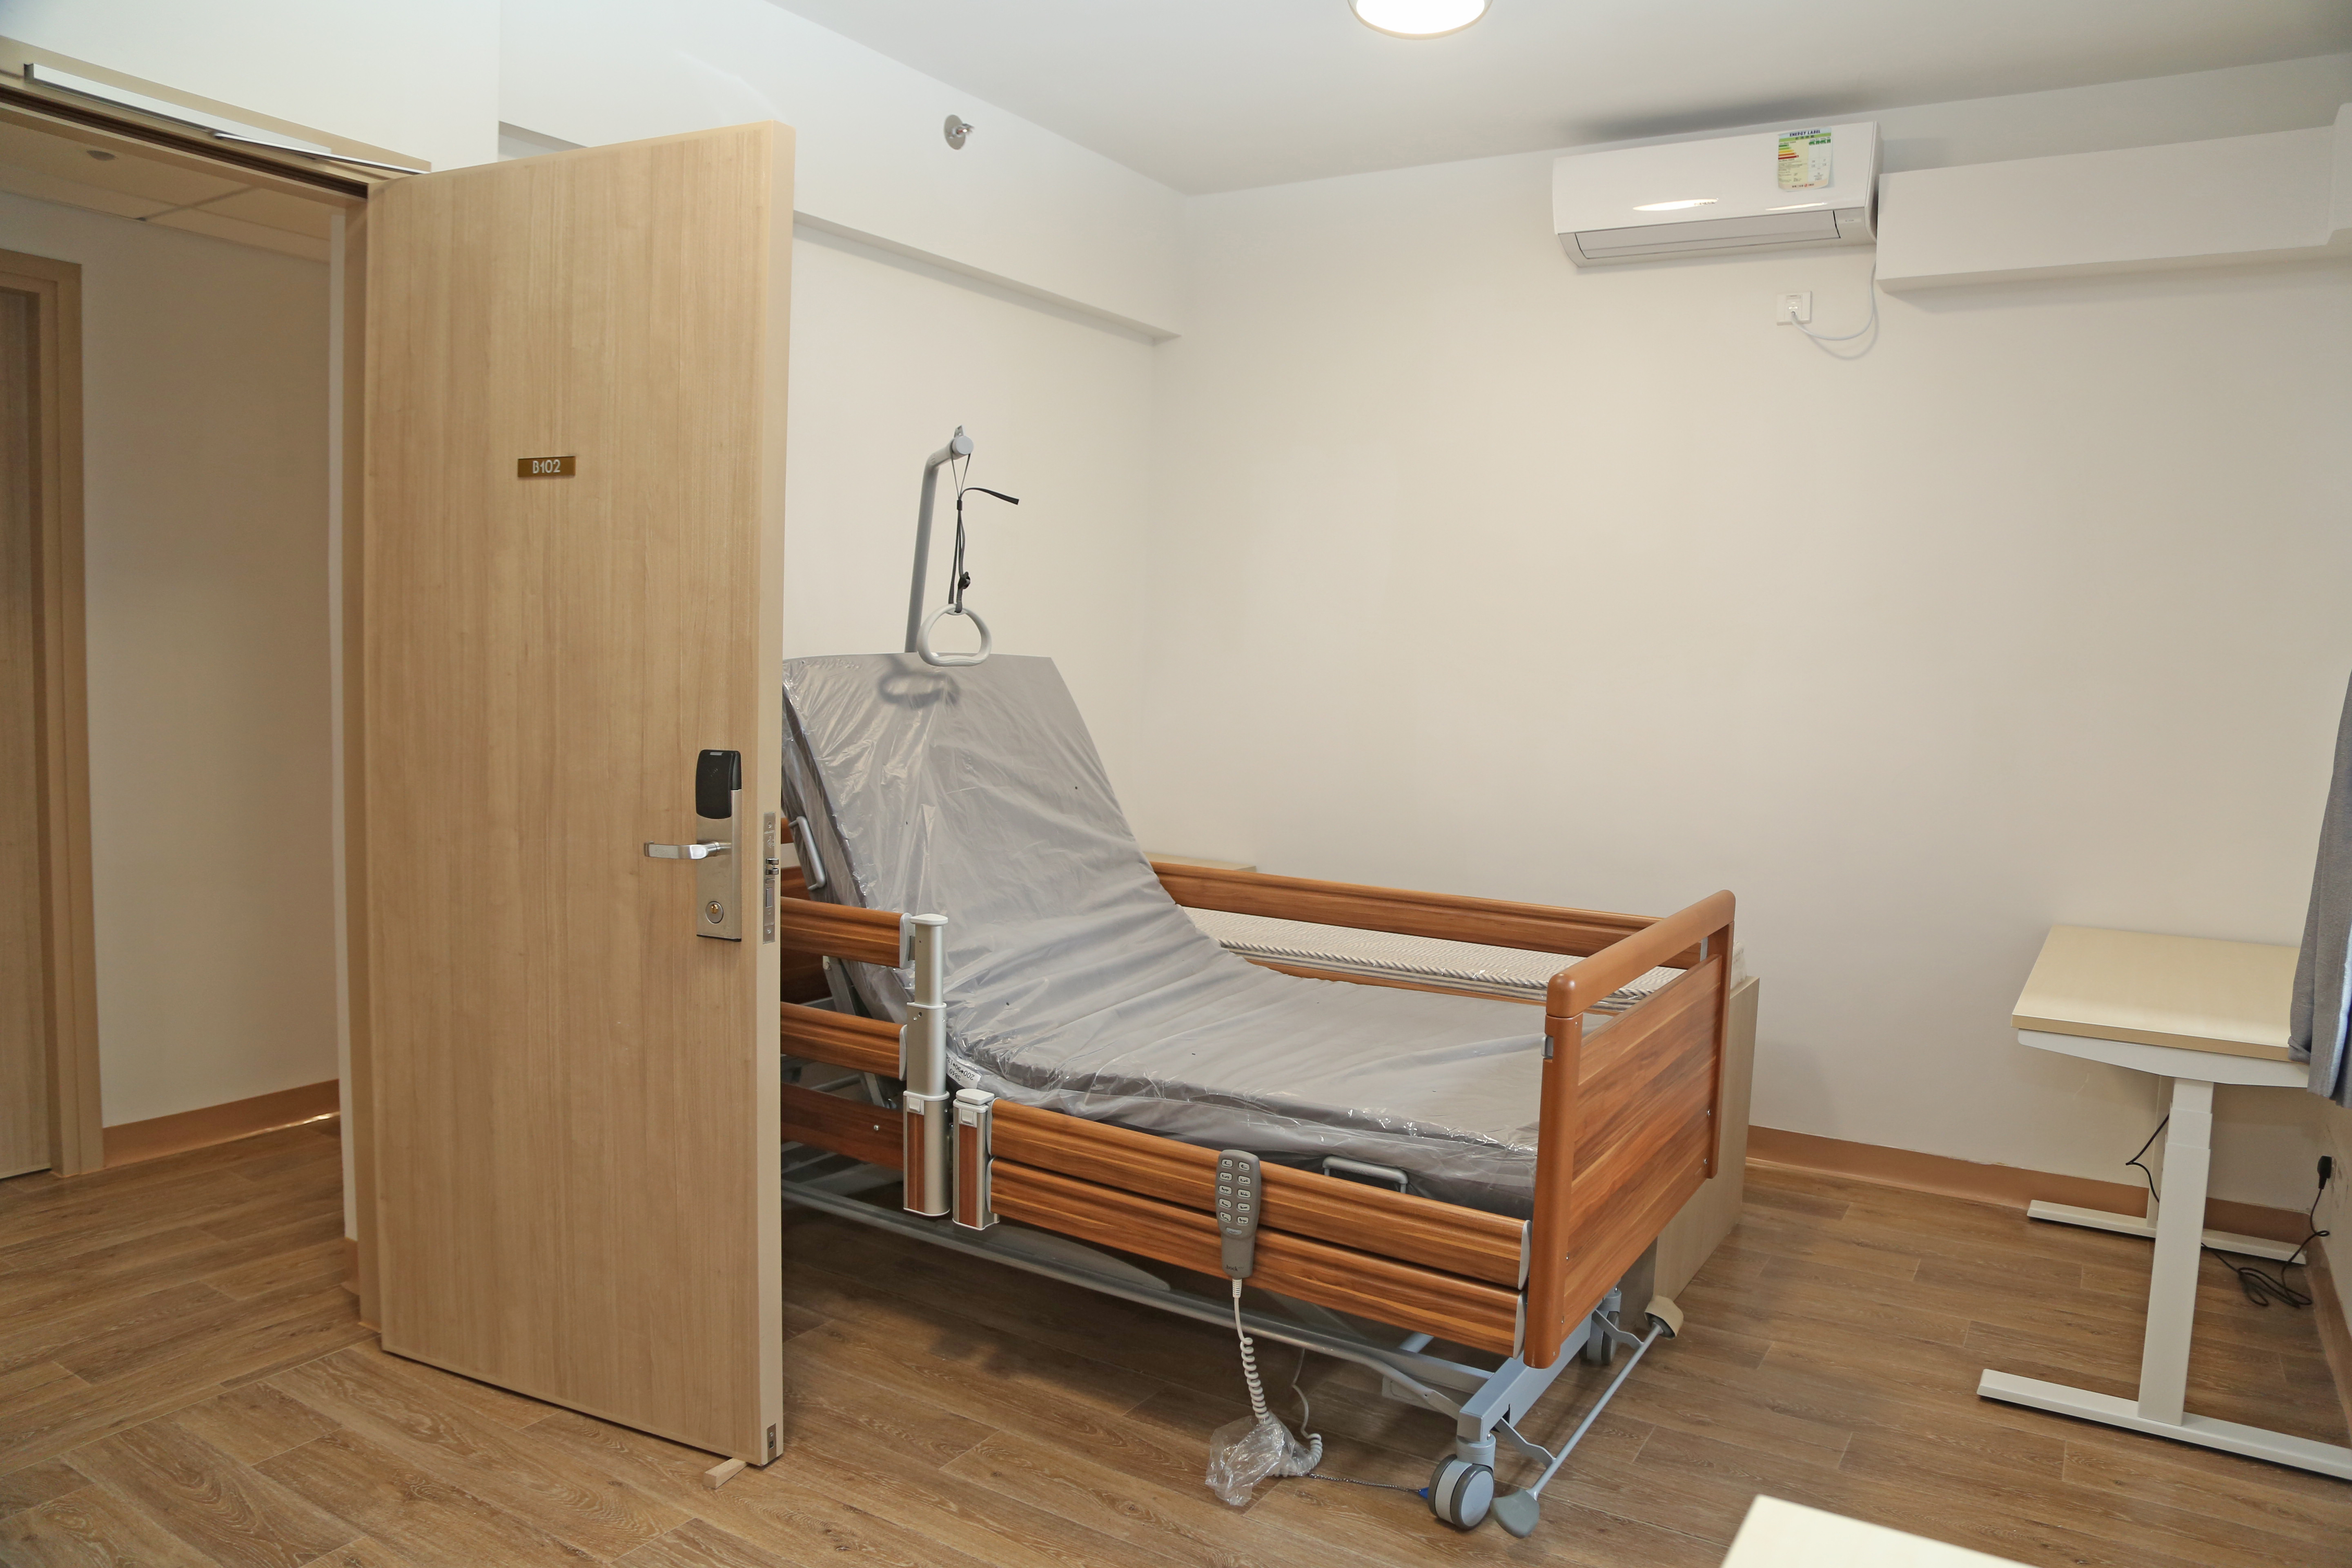 Assistive furniture such as adjustable bed is available in the purpose-designed bedroom to help the daily living of physically-challenged students.